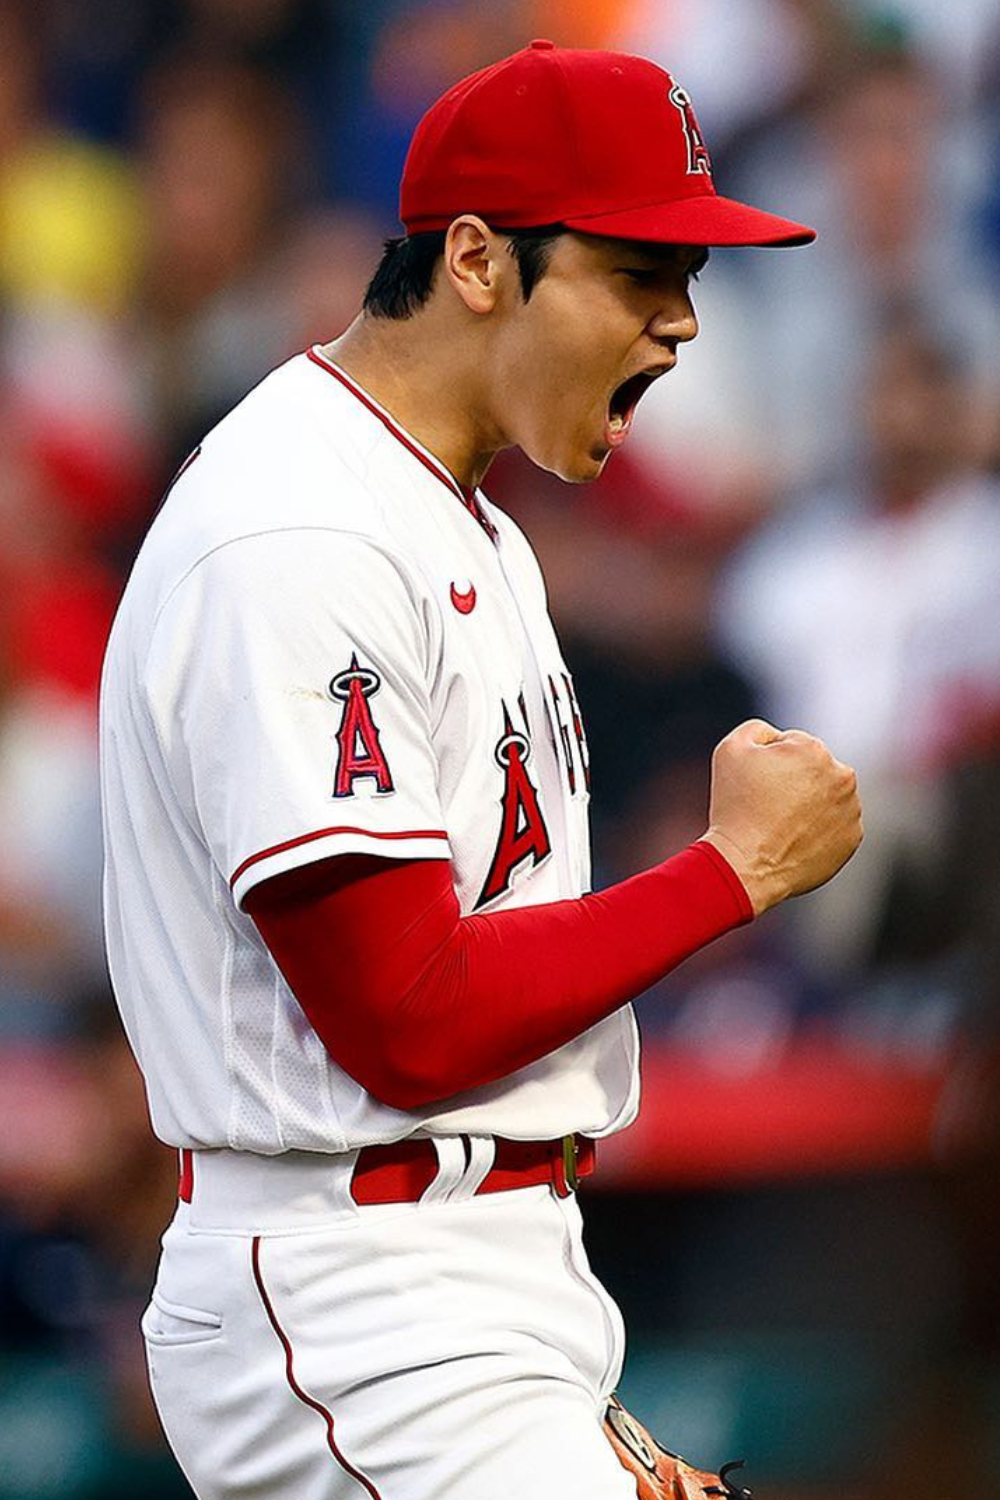 Shohei Ohtani Breaks Record With New Contract With The Dodgers